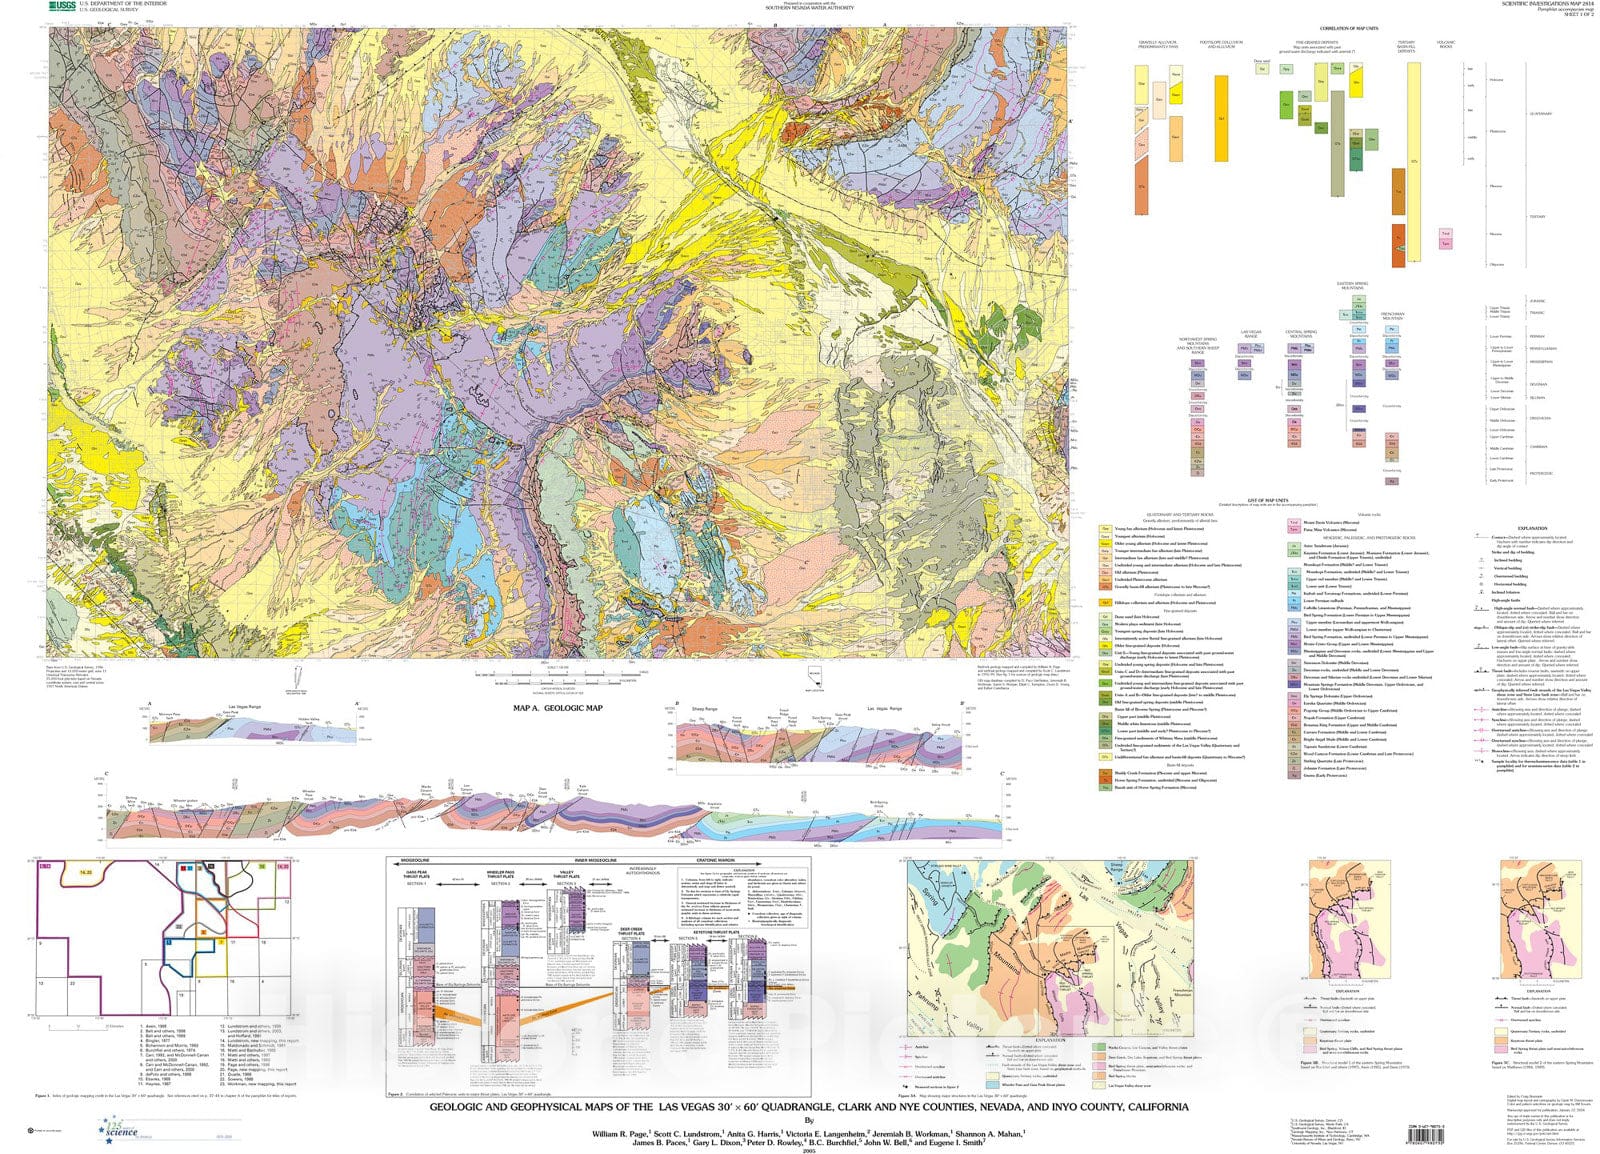 Map : Geologic and geophysical maps of the Las Vegas 30' x 60' quadrangle, Clark and Nye Counties, Nevada, and Inyo County, California, 2005 Cartography Wall Art :